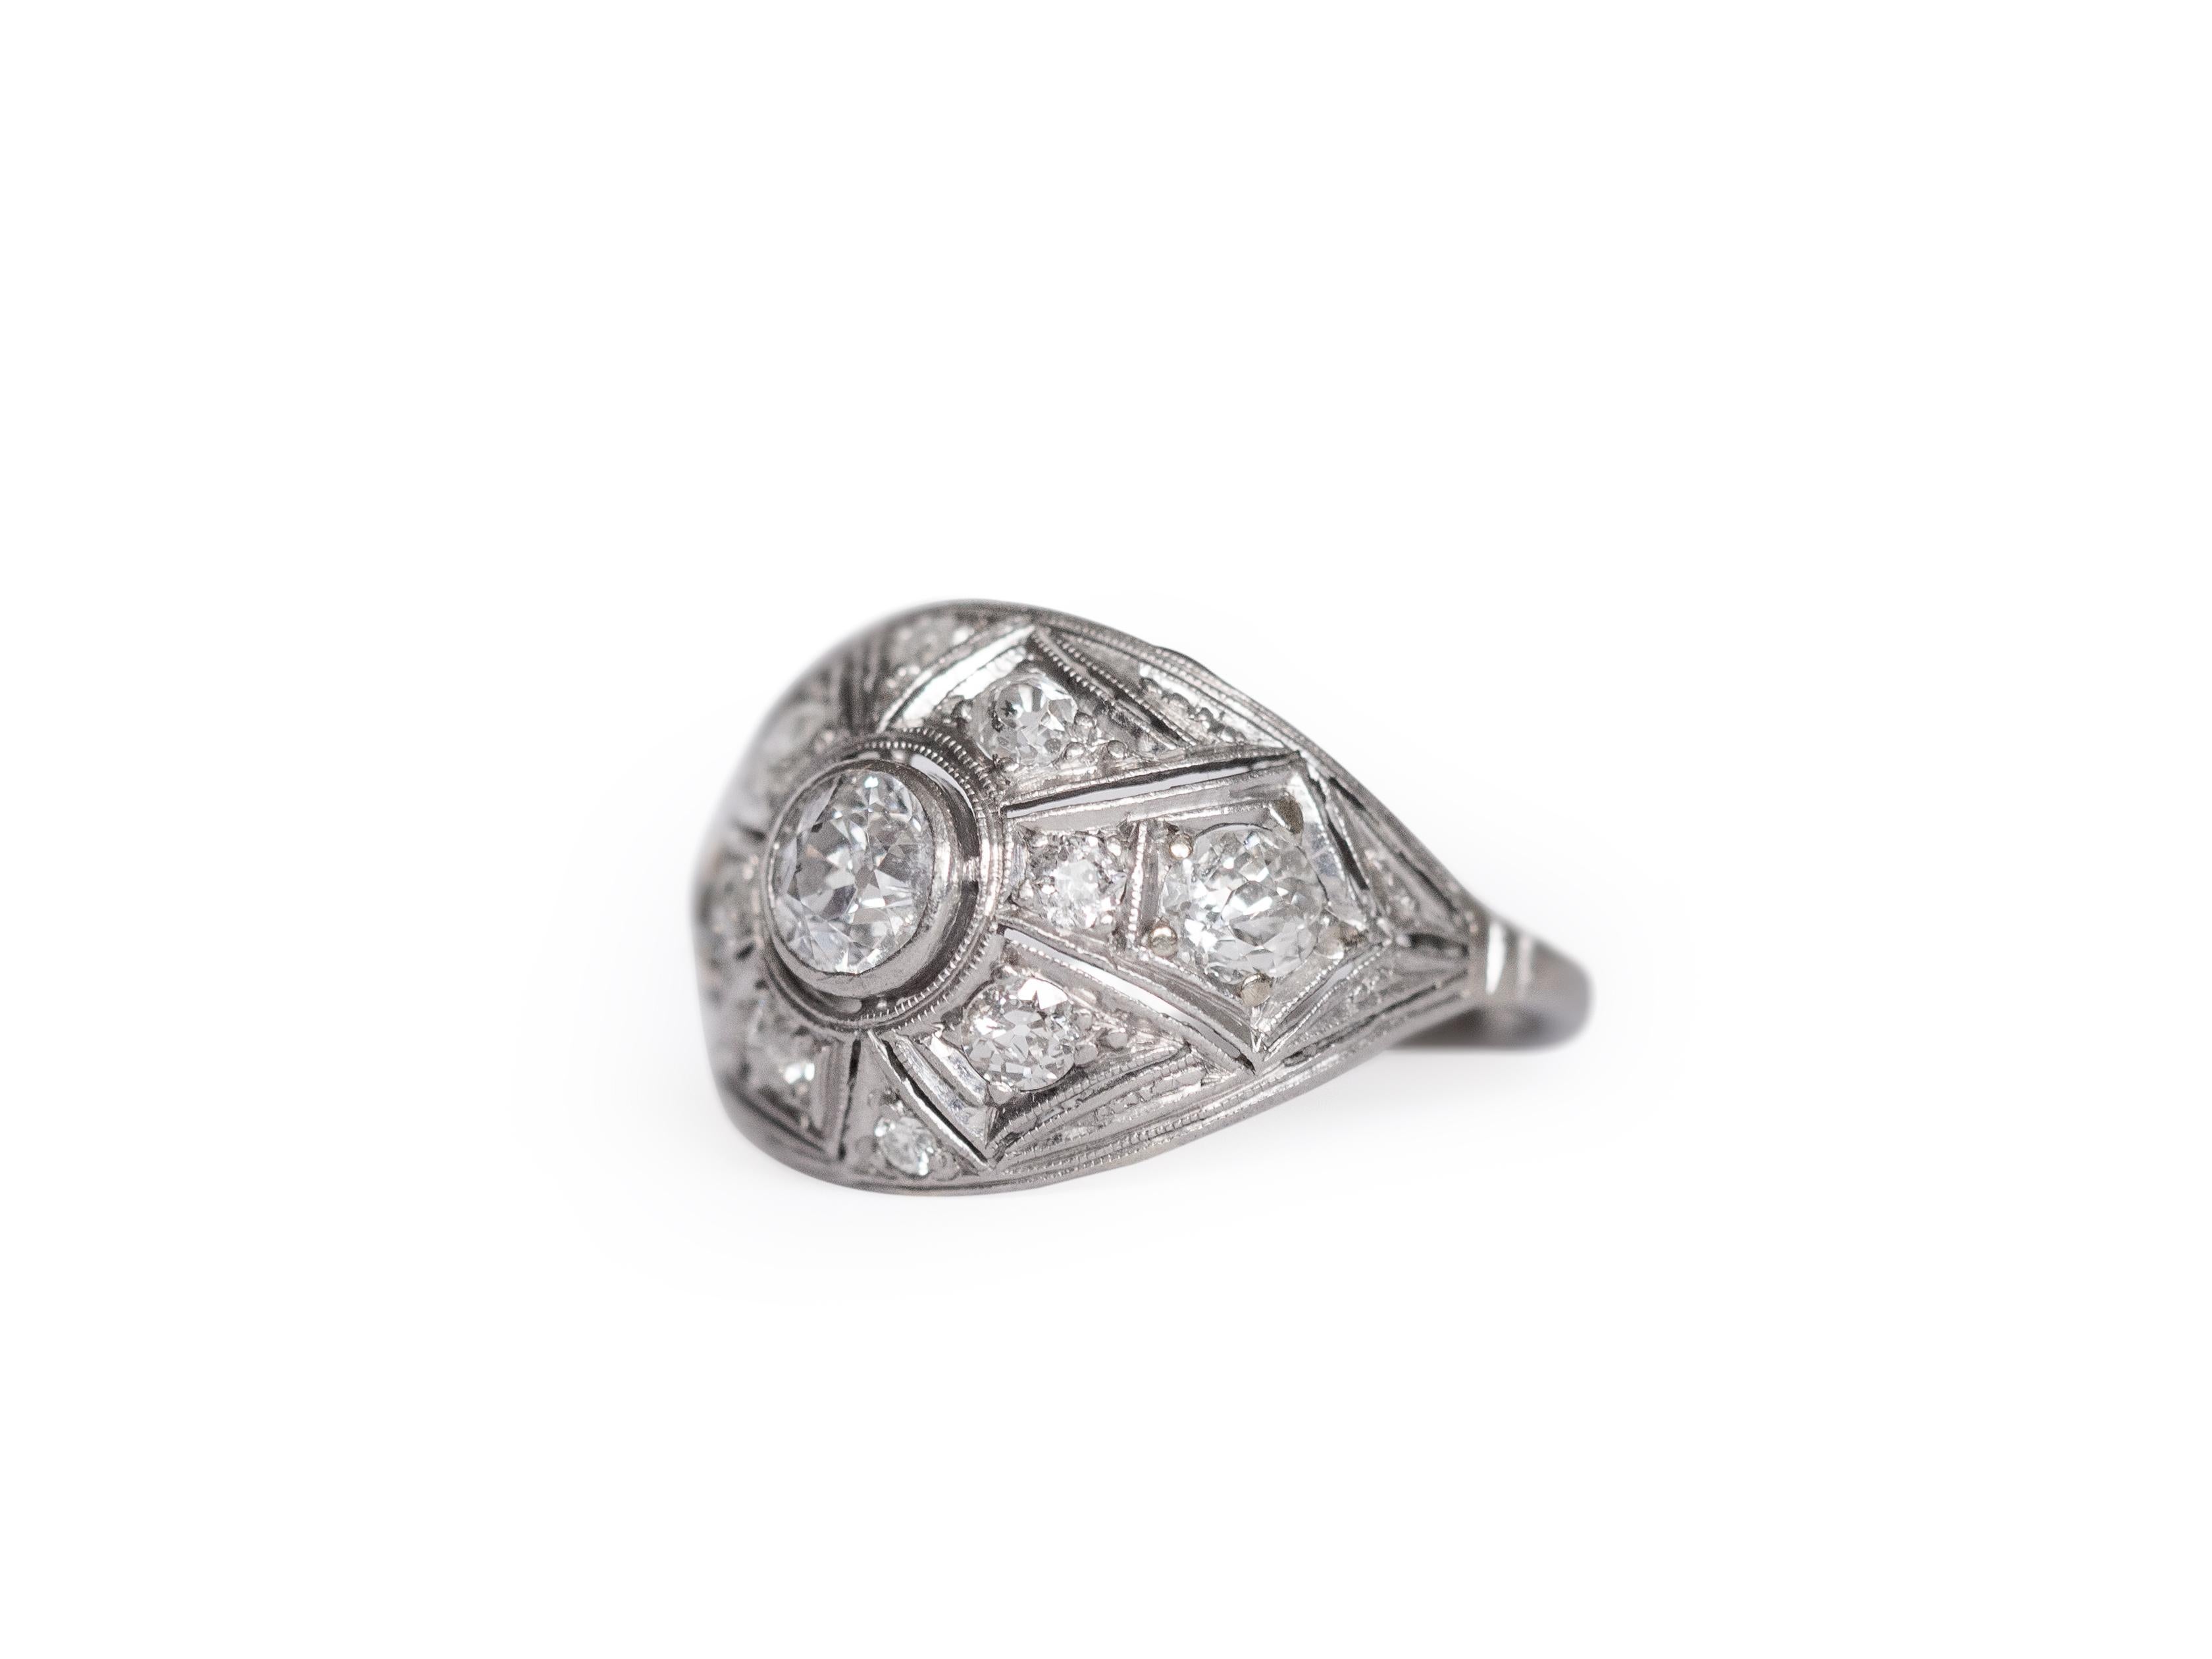 Ring Size: 6.5
Metal Type: Platinum [Hallmarked, and Tested]
Weight: 4.5 grams

Diamond Details:
Weight: .75 carat, total weight
Cut: Old European and Old Mine Brilliant
Color: I-J
Clarity: SI2/I1


Finger to Top of Stone Measurement: